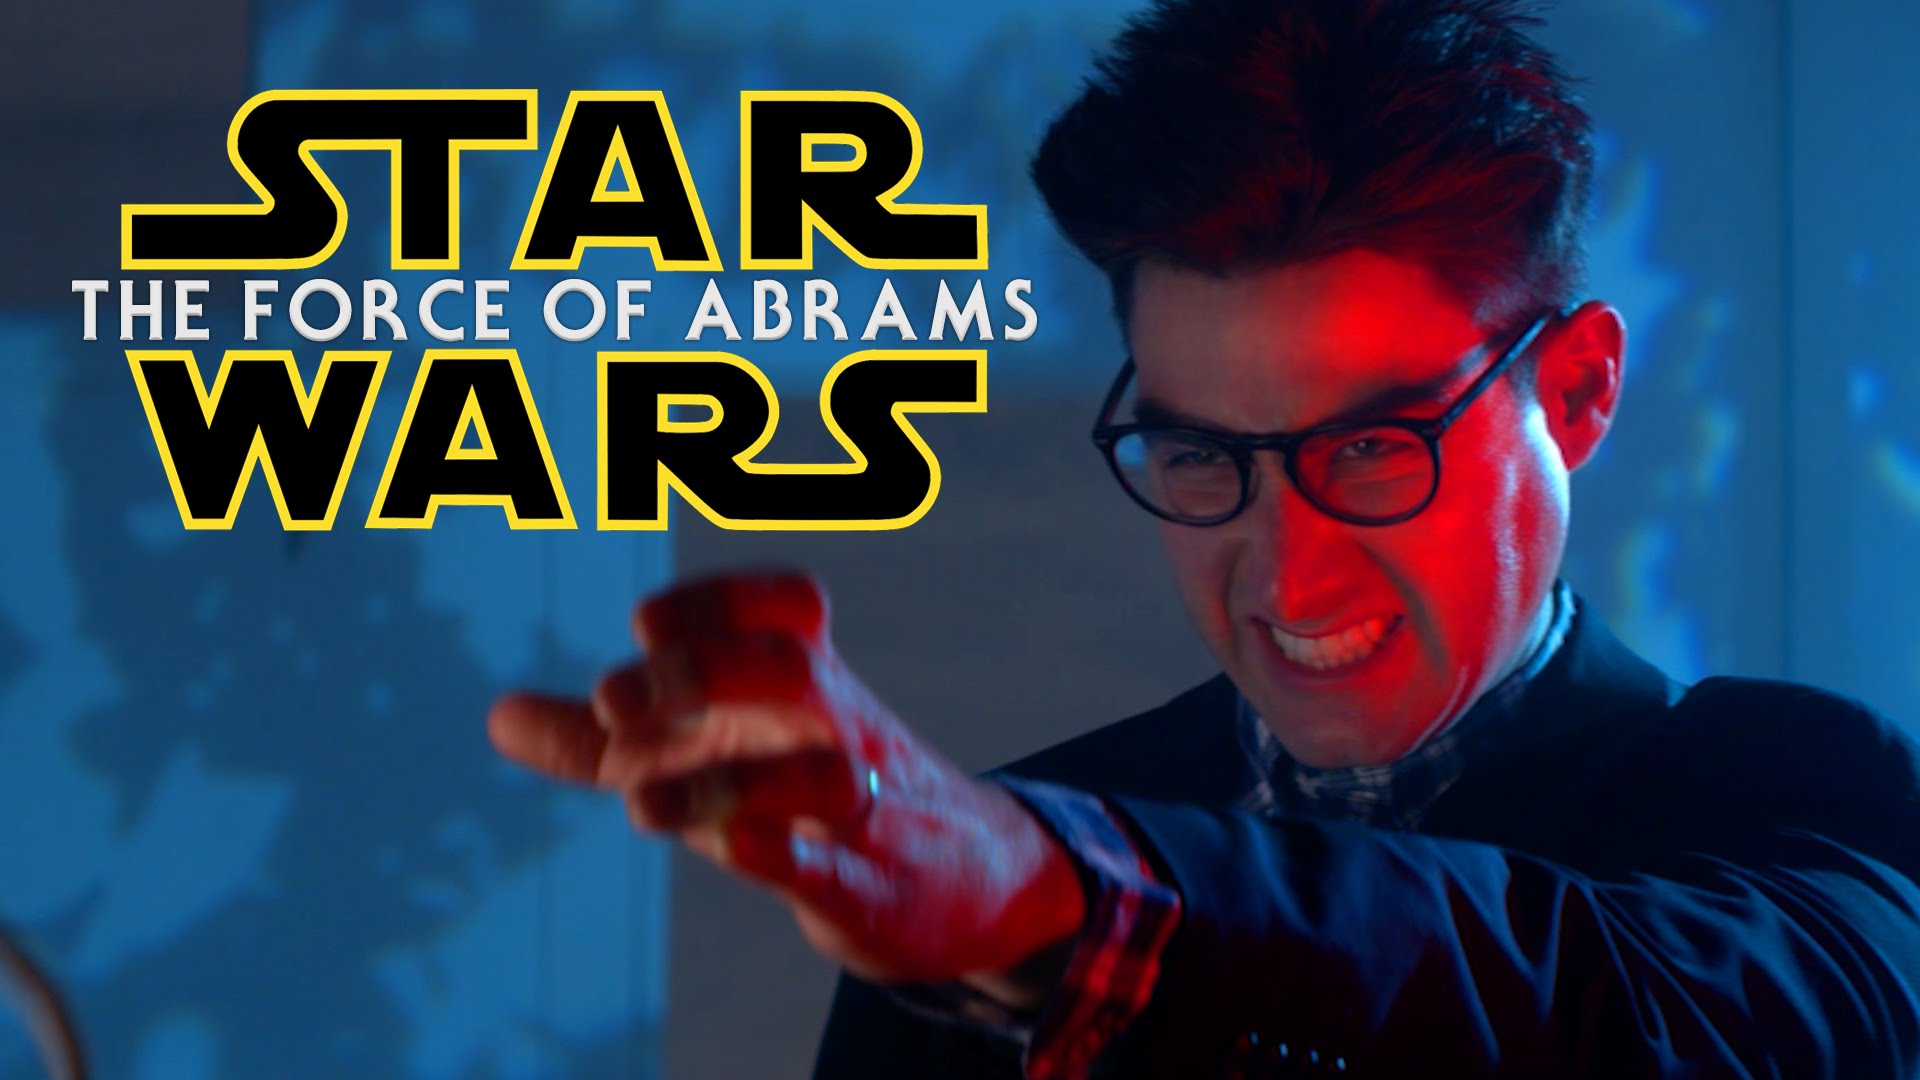 SI’s Casey Jost is J.J. Abrams in Above Average’s Star Wars Parody “The Force of Abrams”